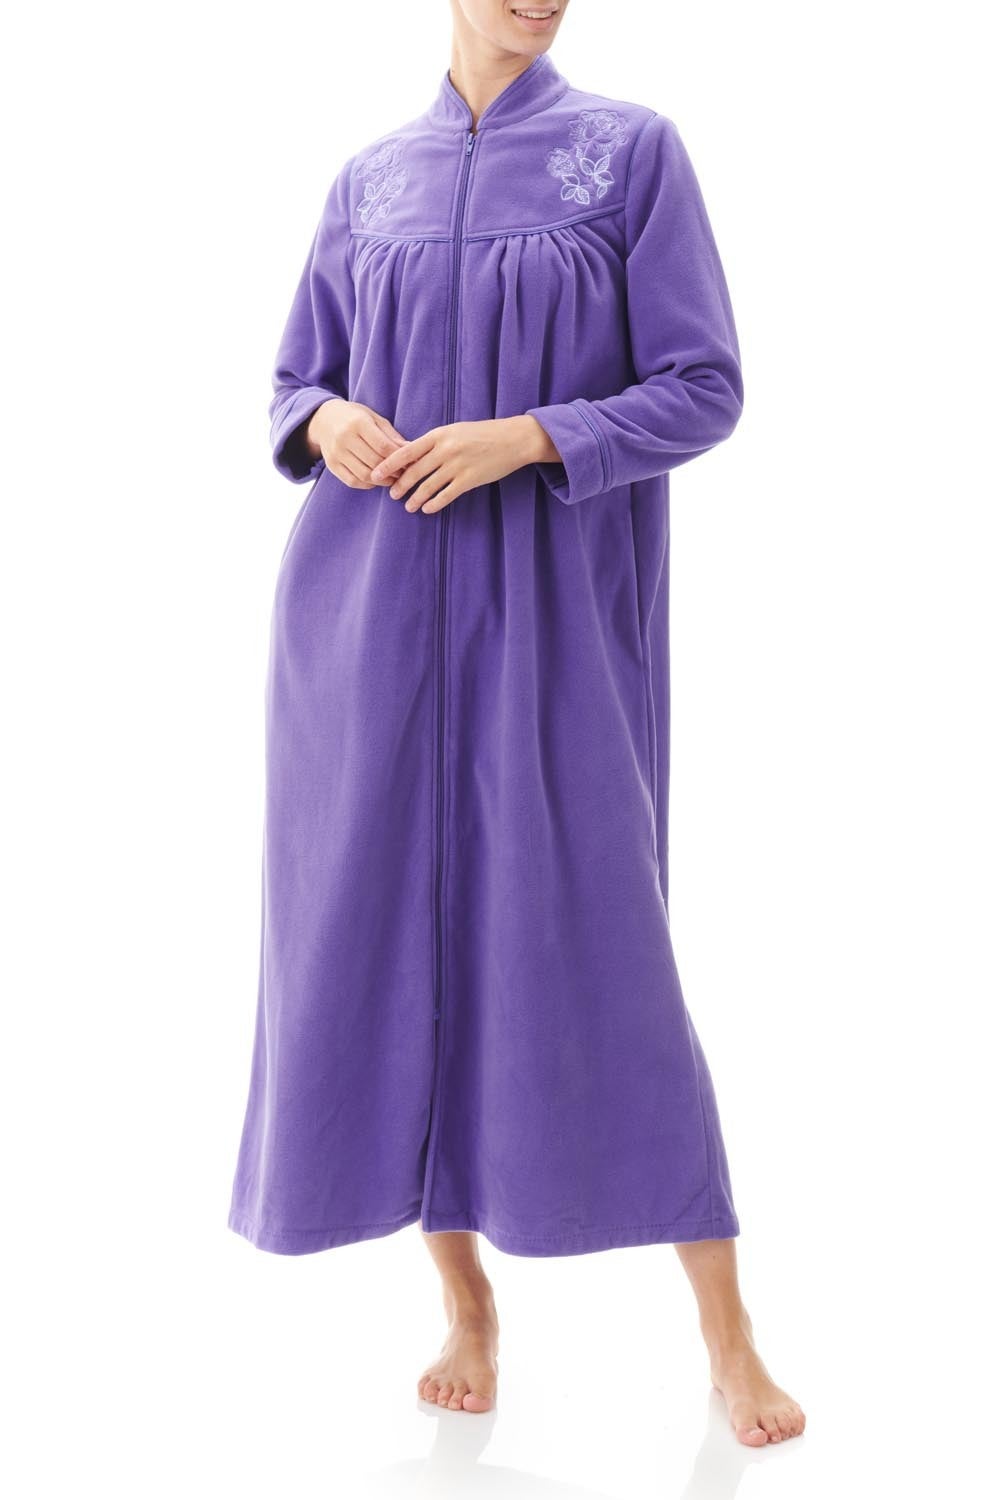 Buyr.com | Robes | LAUREN RALPH LAUREN Women's Long Sleeve Shawl Collar Robe  - Luxurious Pull-On Styling and Belted Waistband with Hand Pockets Purple  SM (US 4-6) One Size